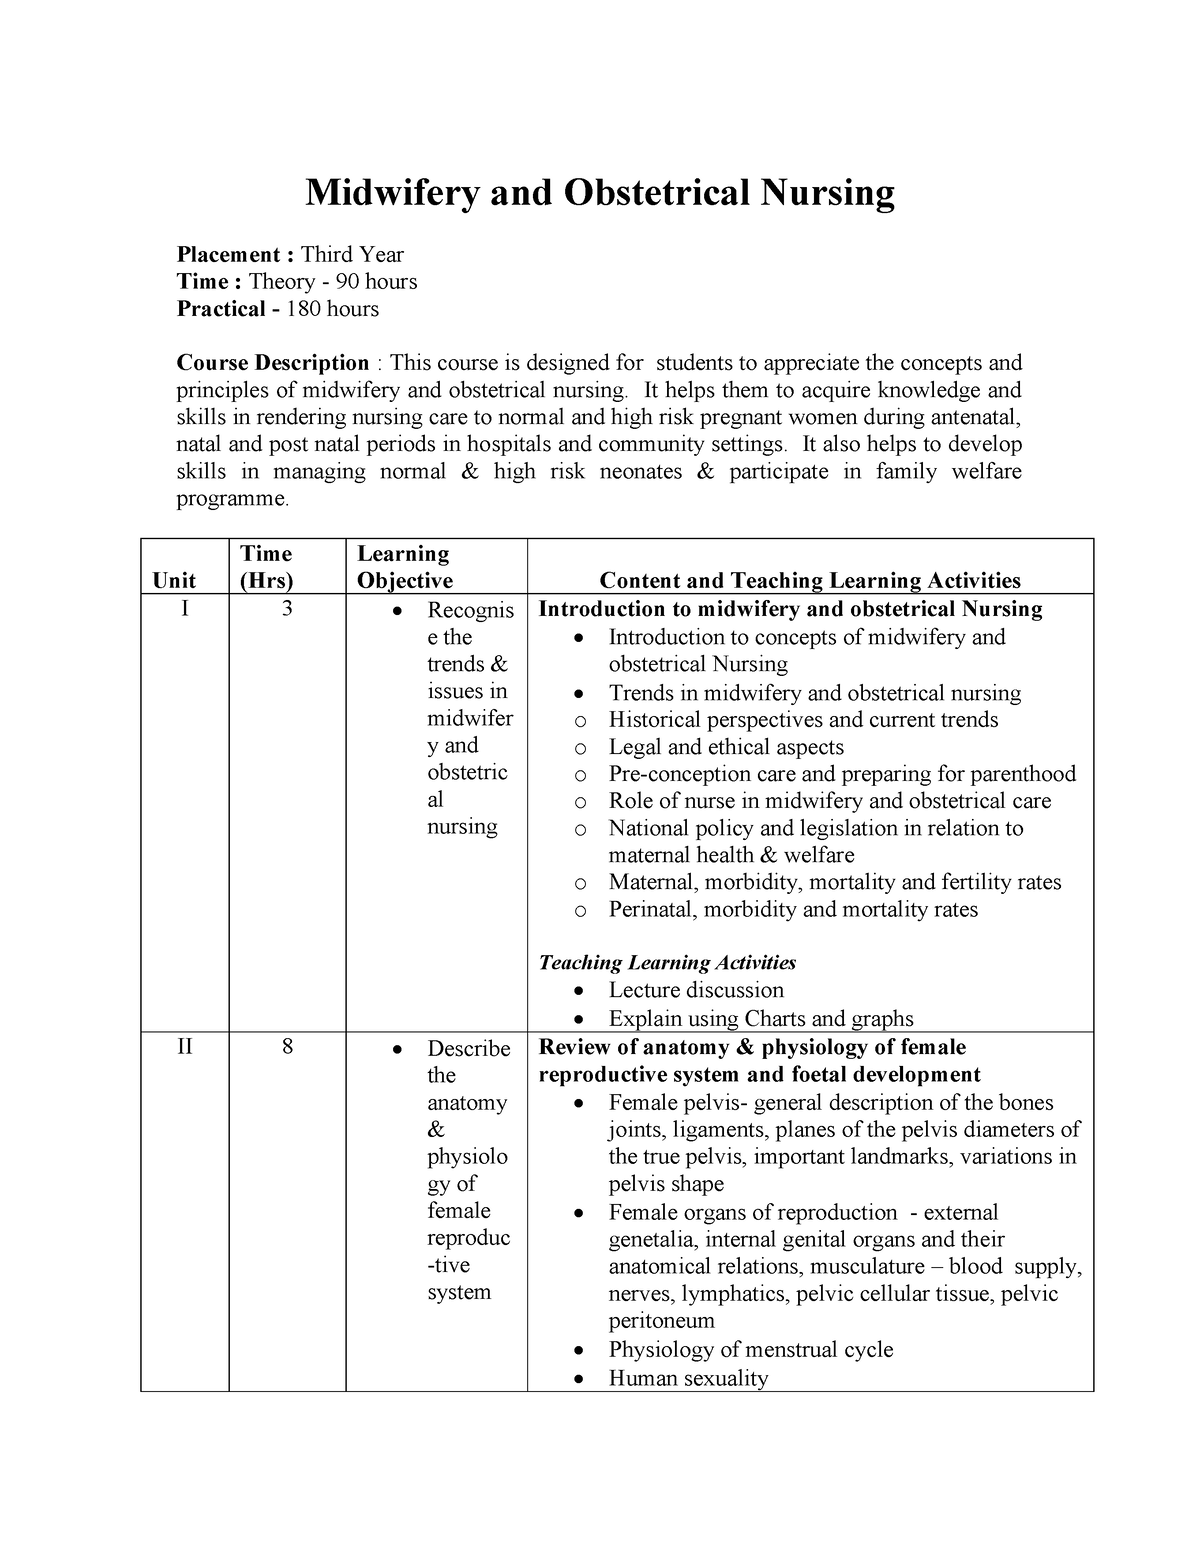 4th year syllabus. - Midwifery and Obstetrical Nursing Placement ...